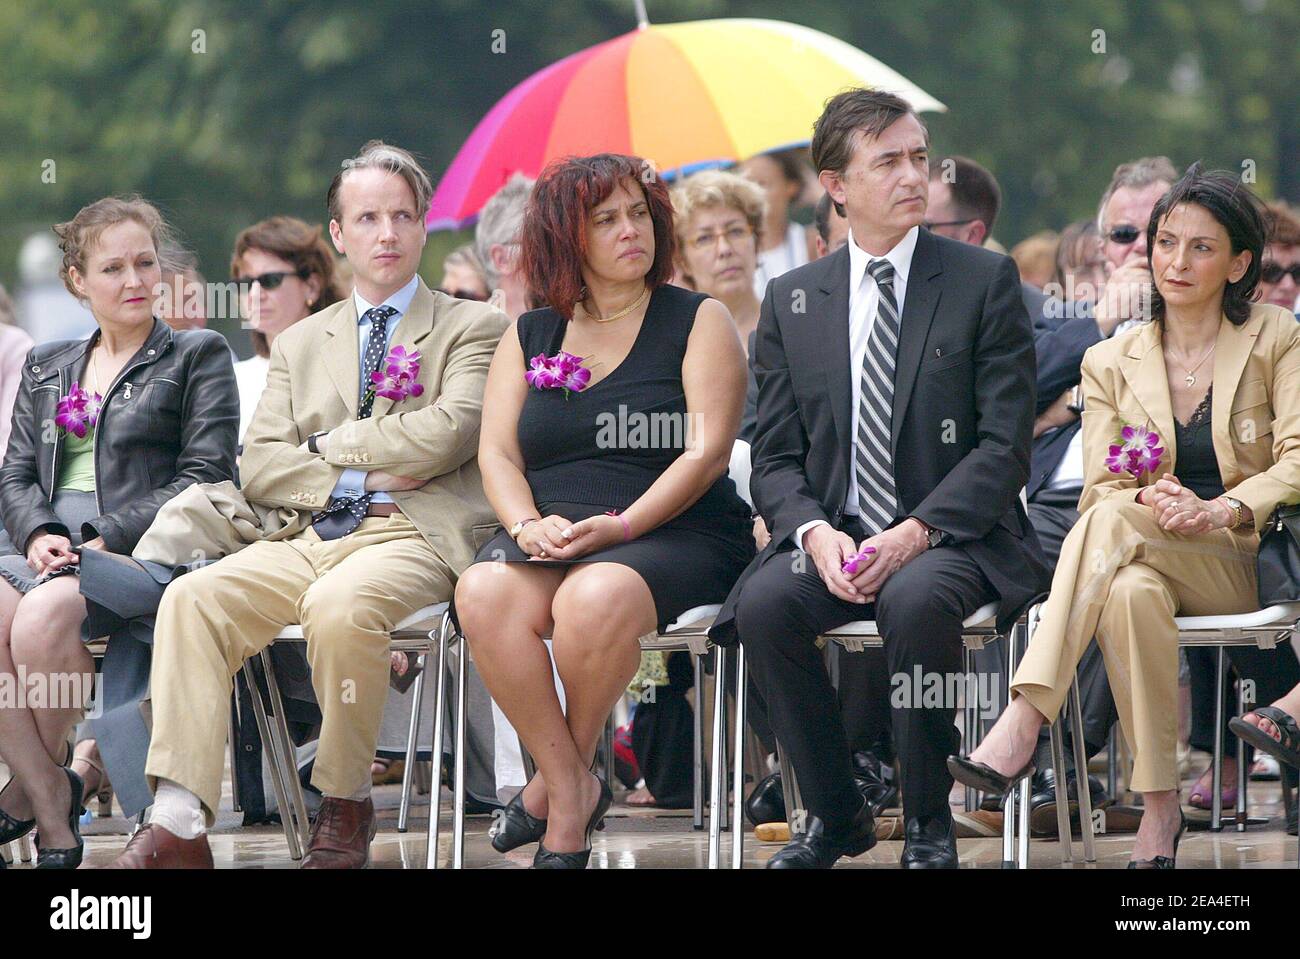 President of victims association Violaine-Patricia Galbert (L) and French foreign affairs minister Philippe Douste-Blazy attend a ceremony for the Tsunami victims held on Place du Trocadero in Paris, France on June 26, 2005. Photo by Mehdi Taamallah/ABACA. Stock Photo